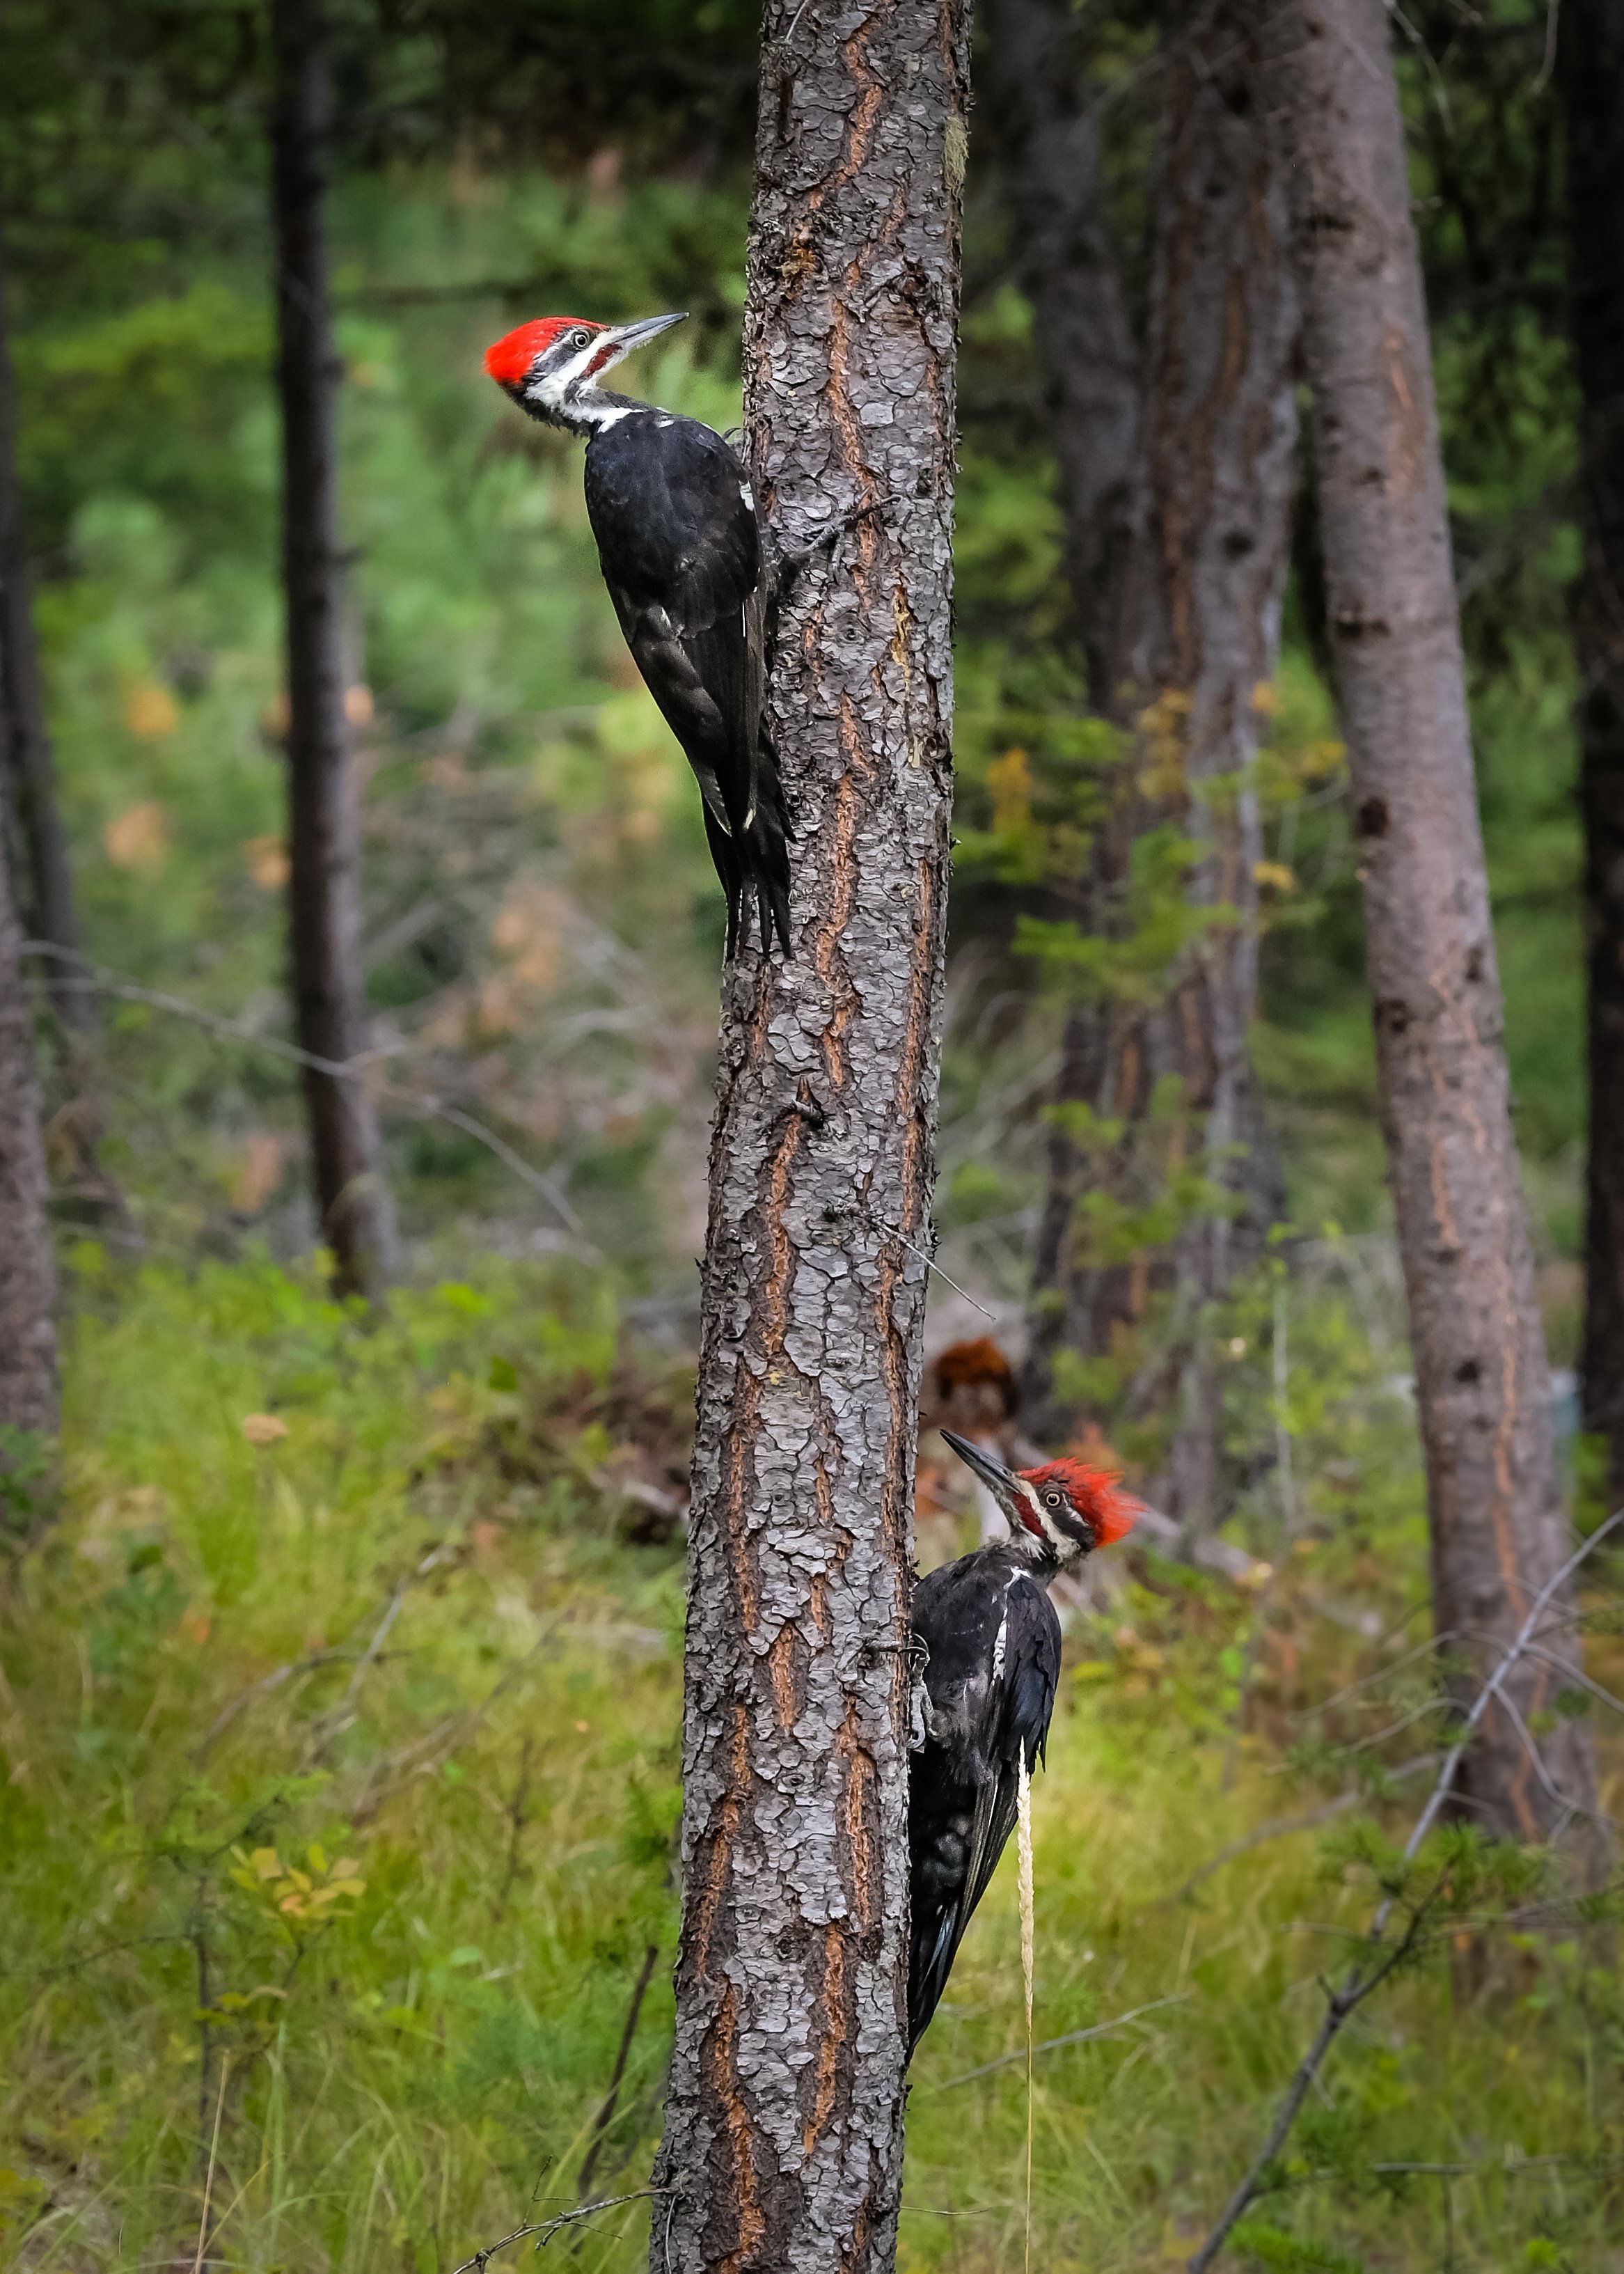 Bring your camera, you may just get lucky with a rare shot like this one - Peleated Woodpeckers at The Hohnstead Glamping Cabins Resort.